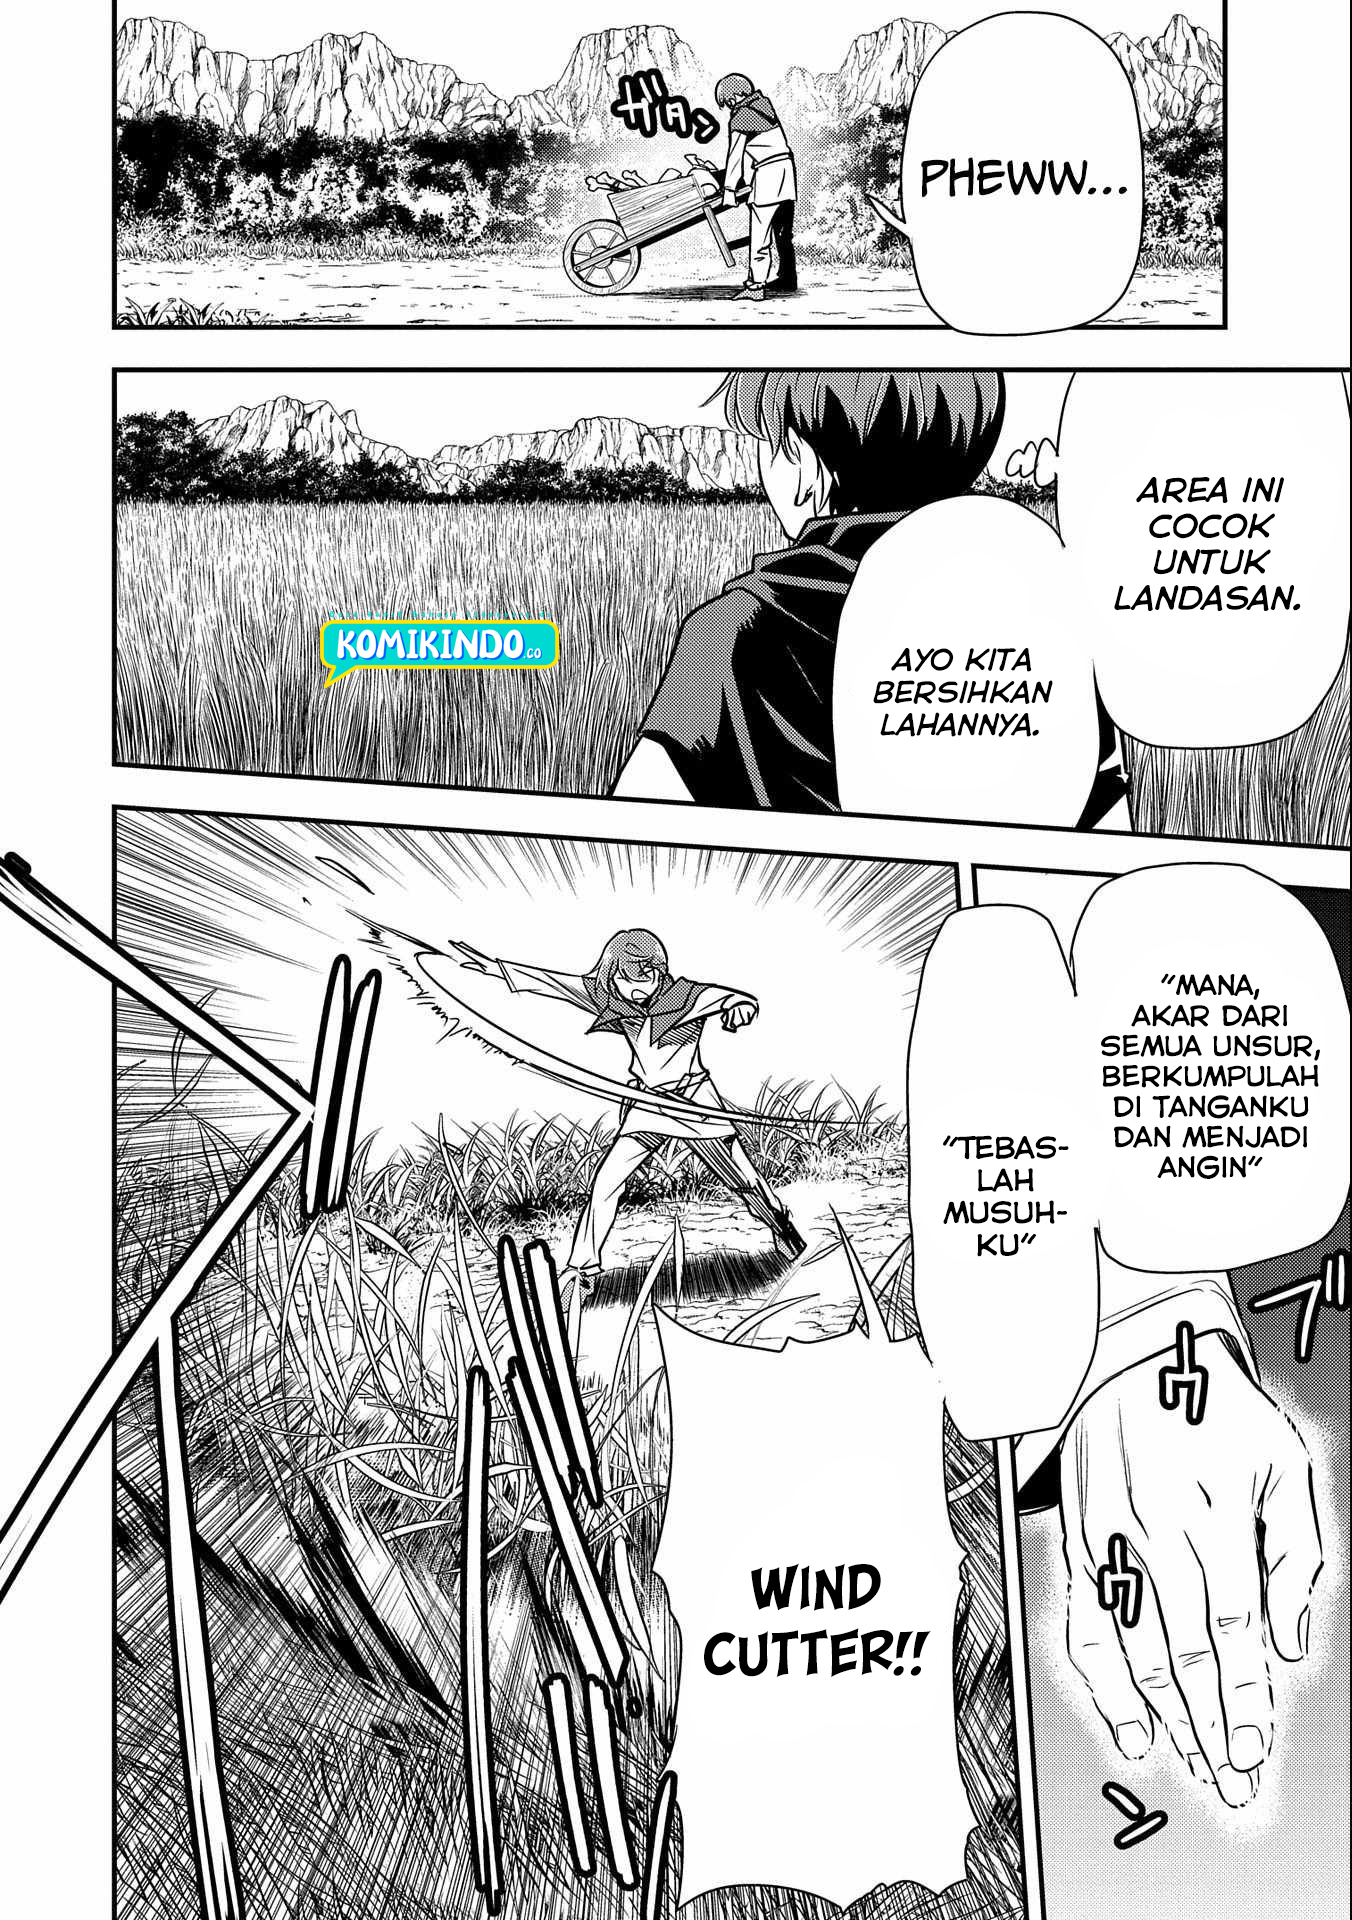 Villager A Wants to Save the Villainess no Matter What! Chapter 06